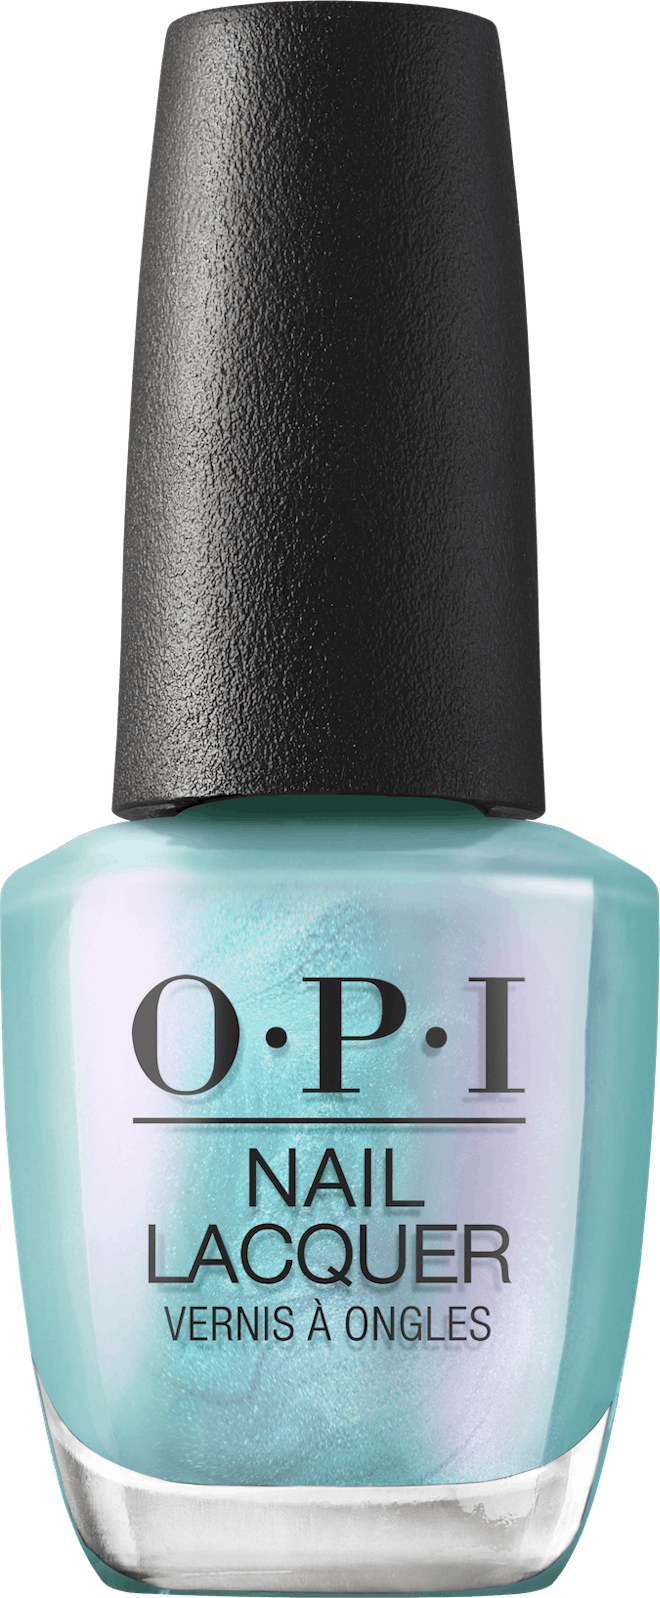 OPI Pisces the Future Nail Lacquer